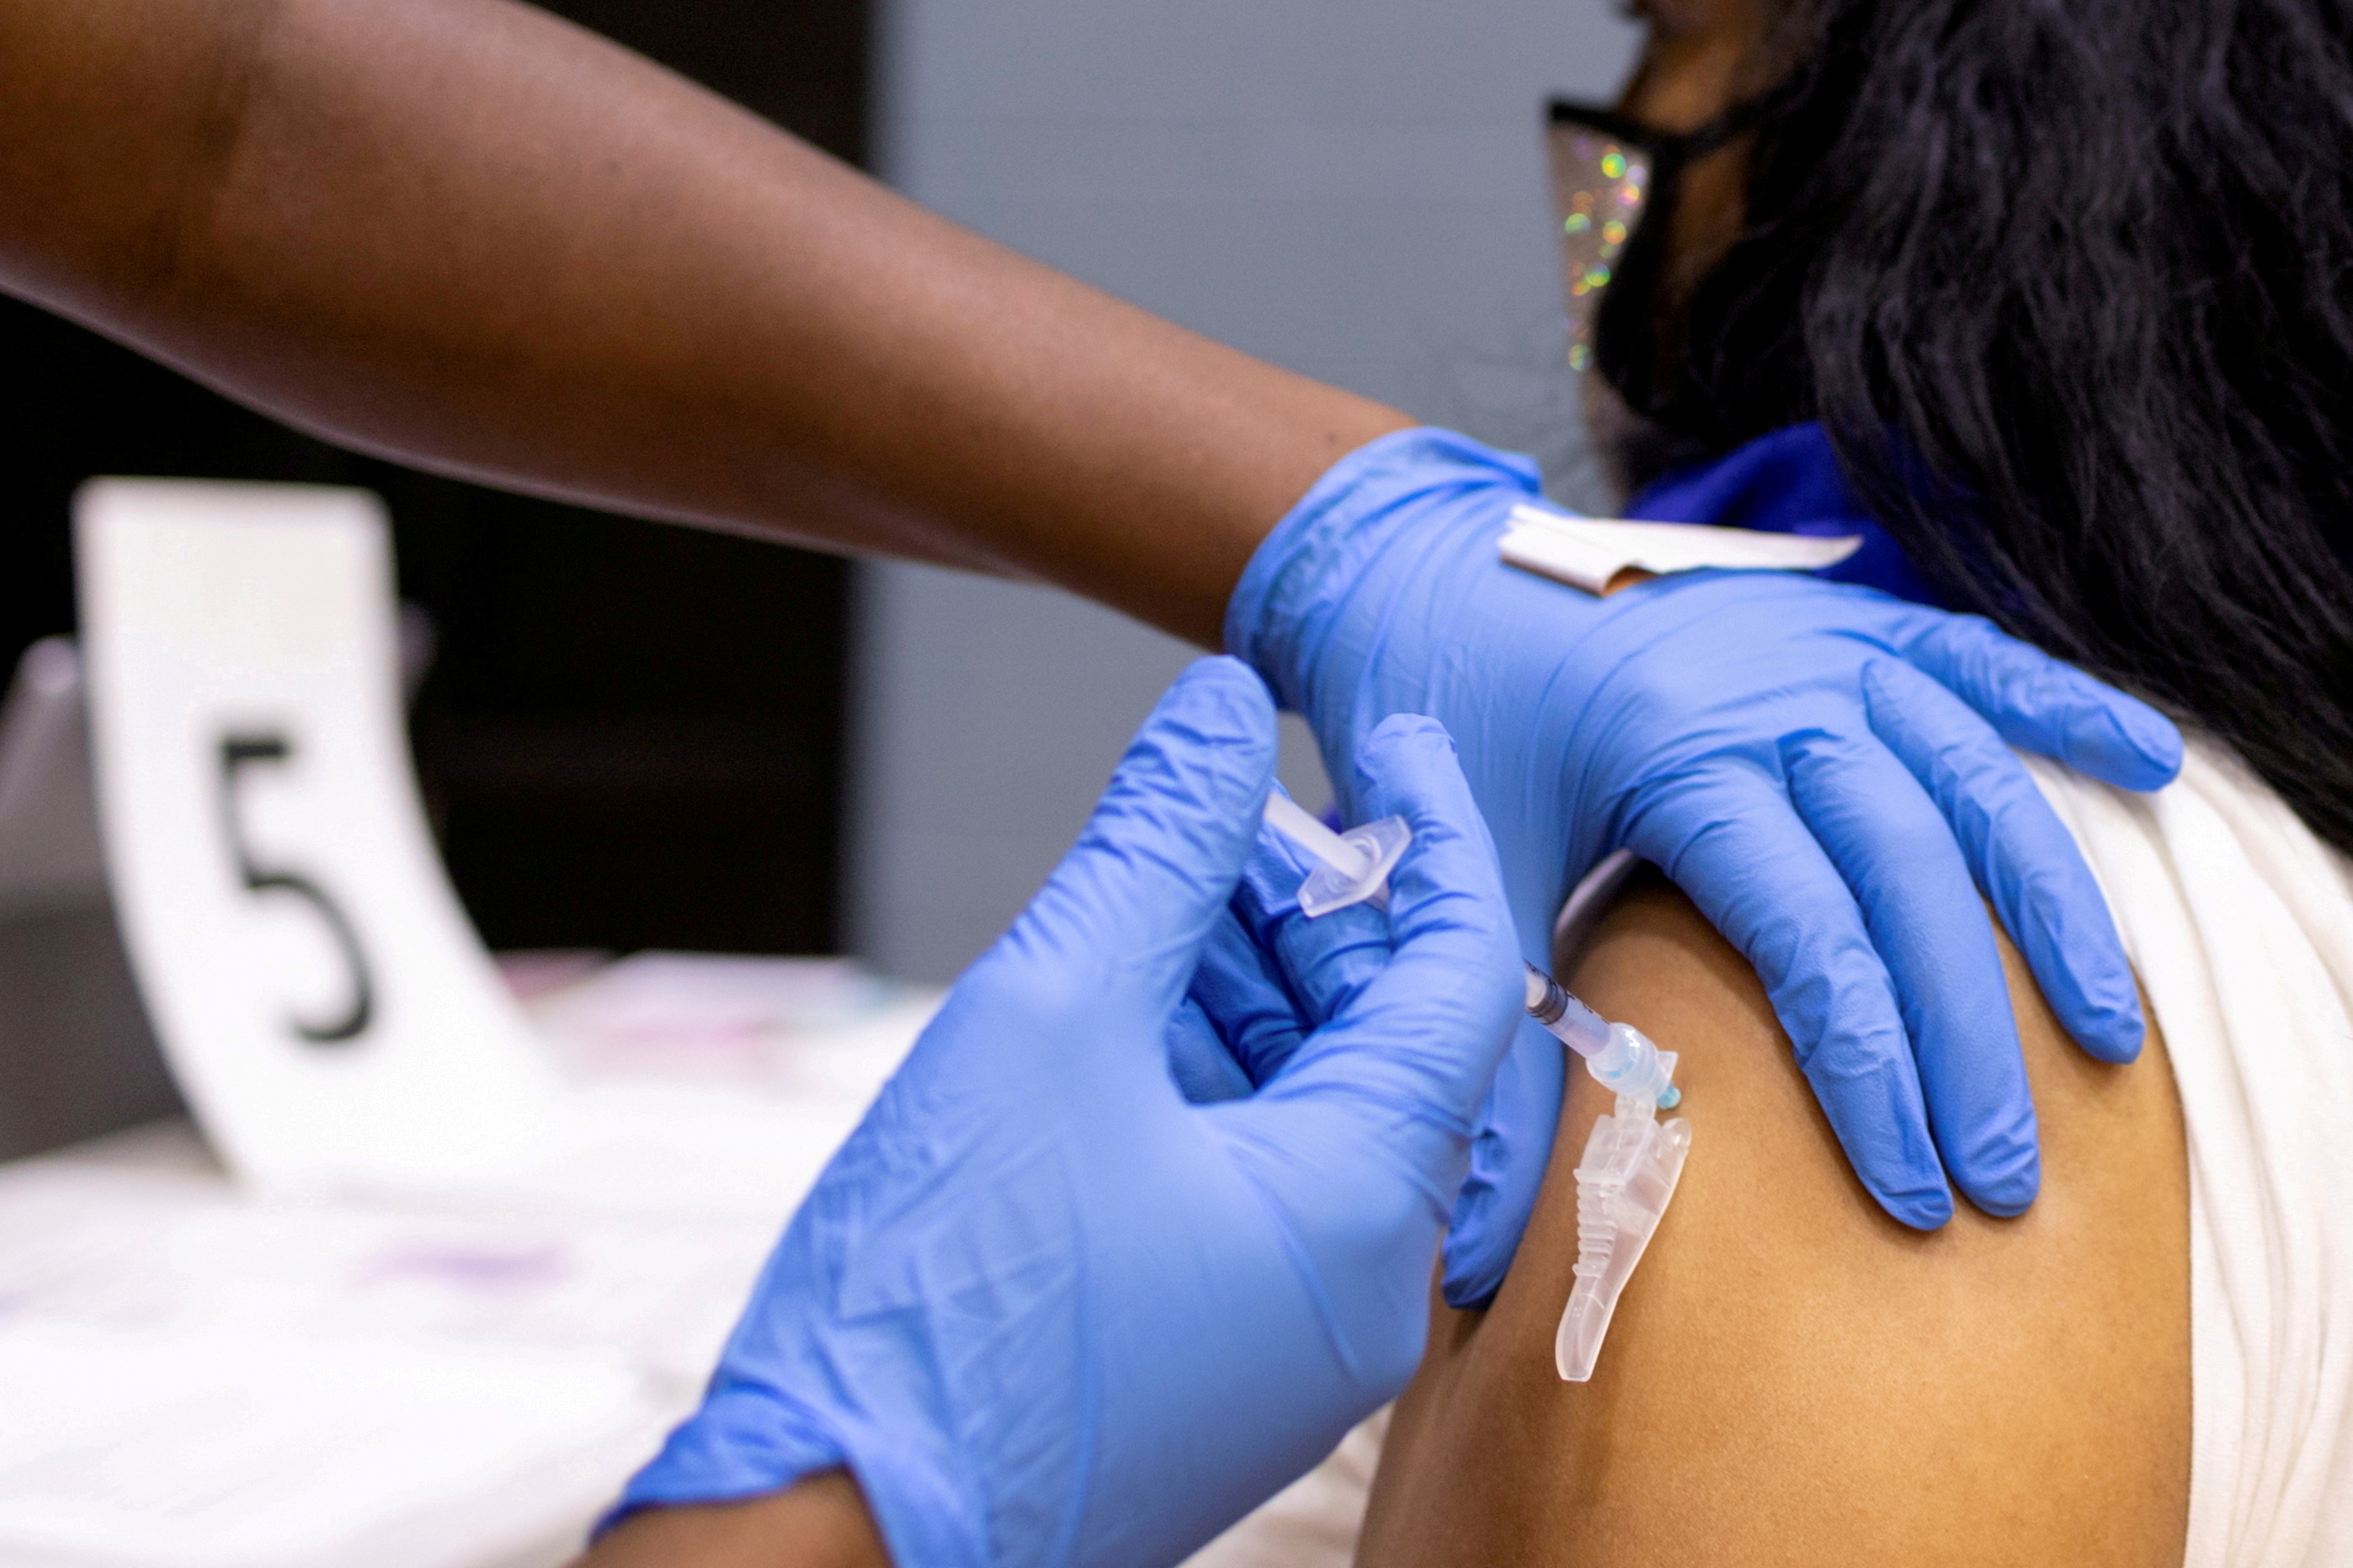 A woman receives a COVID-19 vaccine at a clinic in Philadelphia